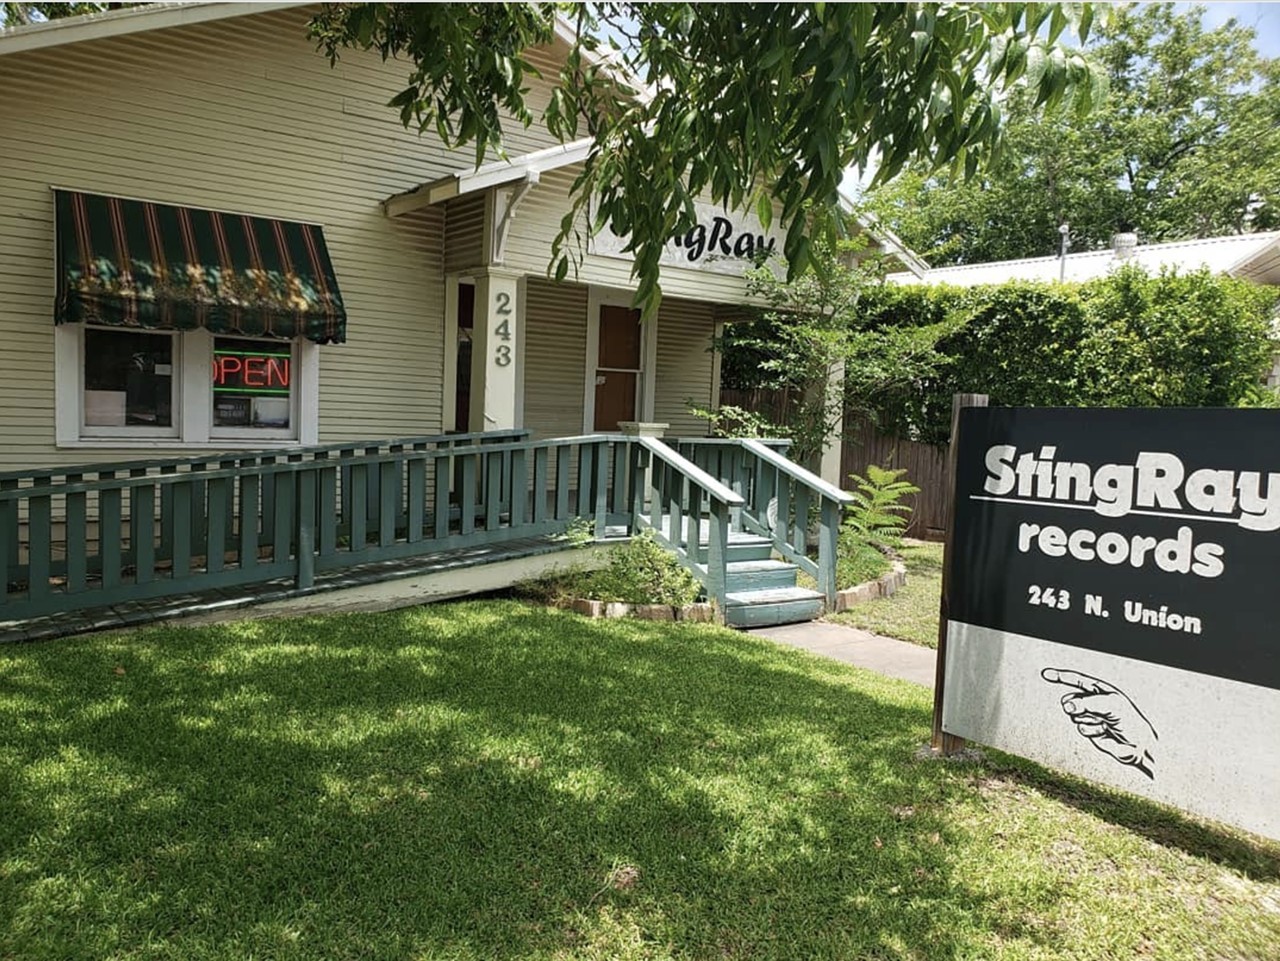 StingRay Records
243 N. Union Ave., New Braunfels, (830) 629-2662, facebook.com/stingrayrecords
Whether you need an excuse for a bit of a road trip or are just a dedicated collector, StingRay Records in New Braunfels is worth checking out. The shop stocks both new and used vinyl so you should be set for all your record-collecting needs.
Photo via Instagram / stingray_records